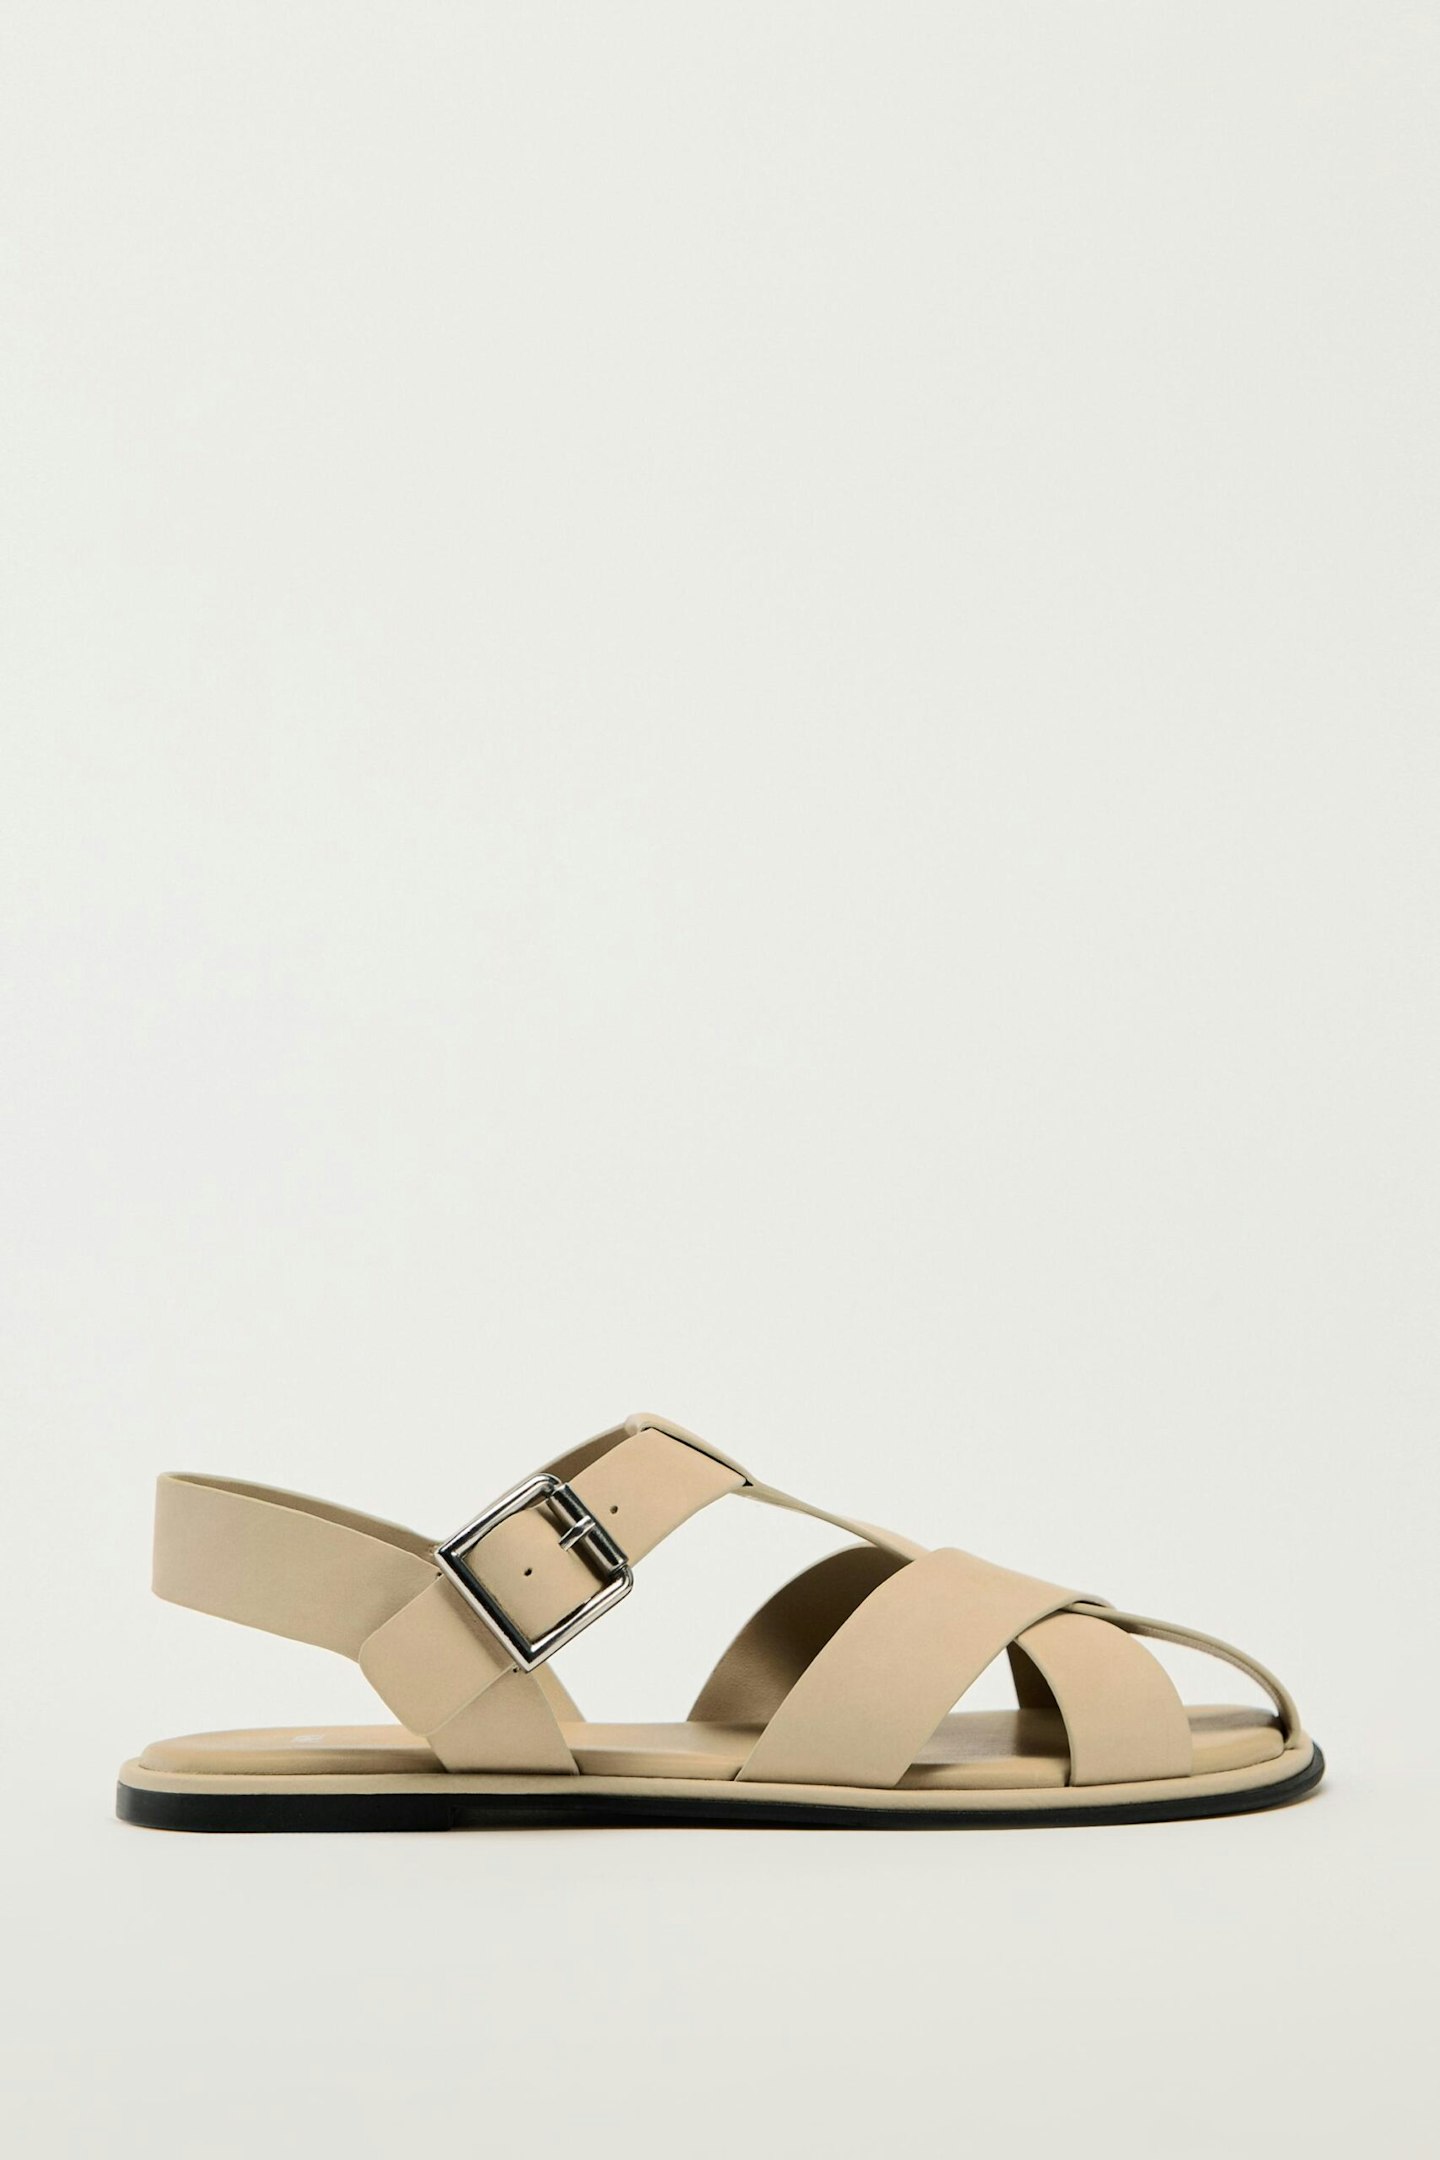 Zara, Flat Leather Cage Sandals